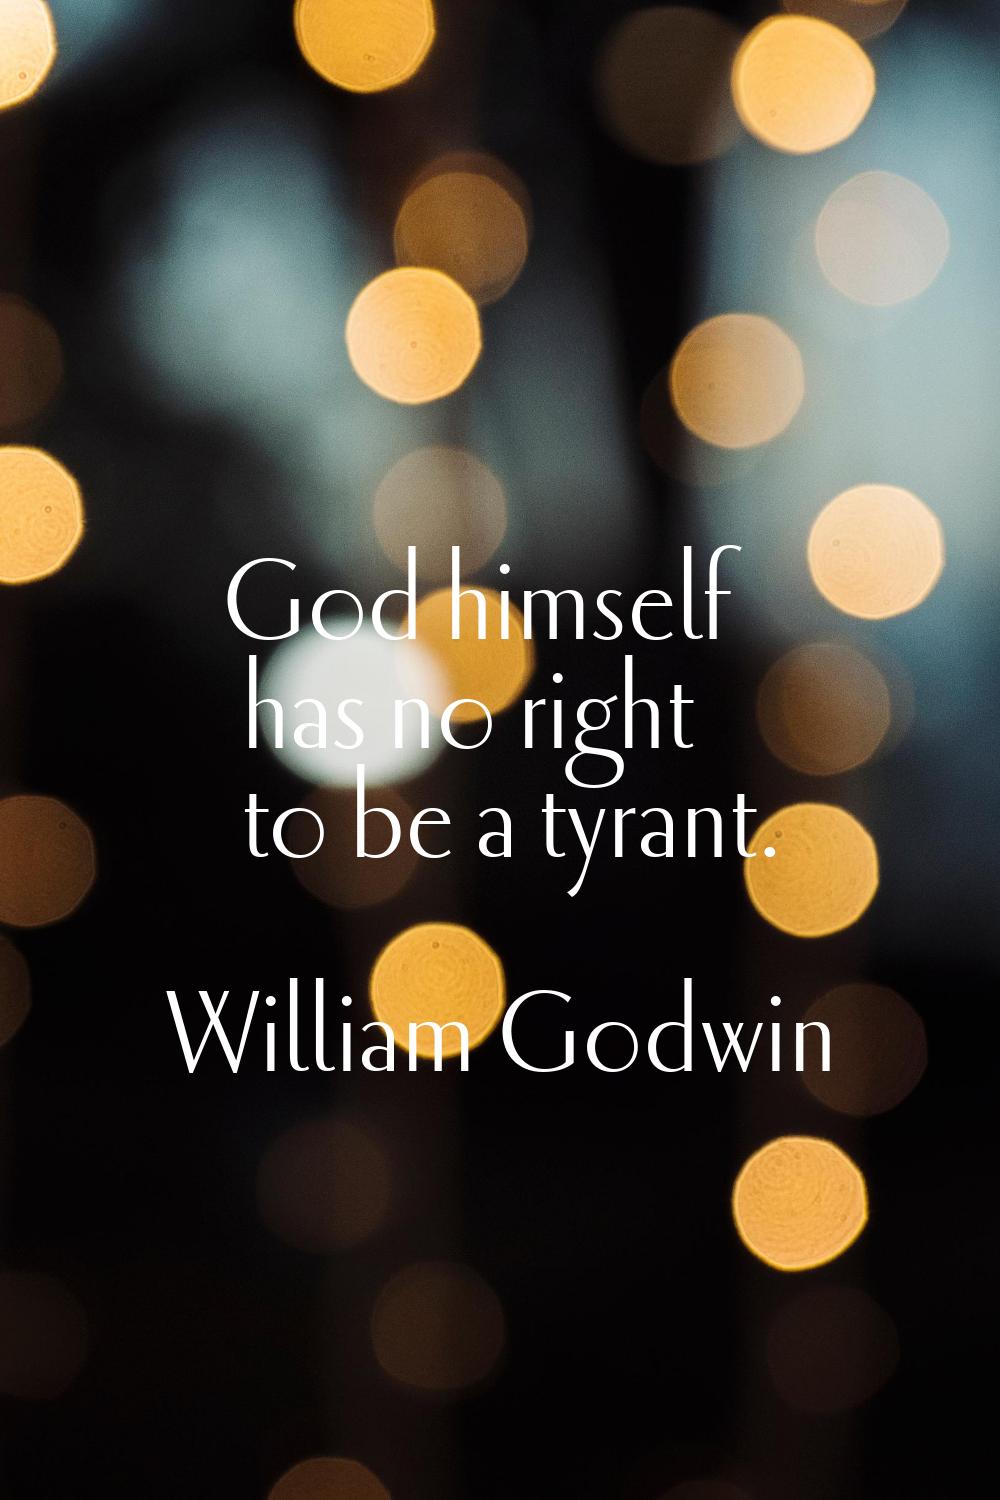 God himself has no right to be a tyrant.